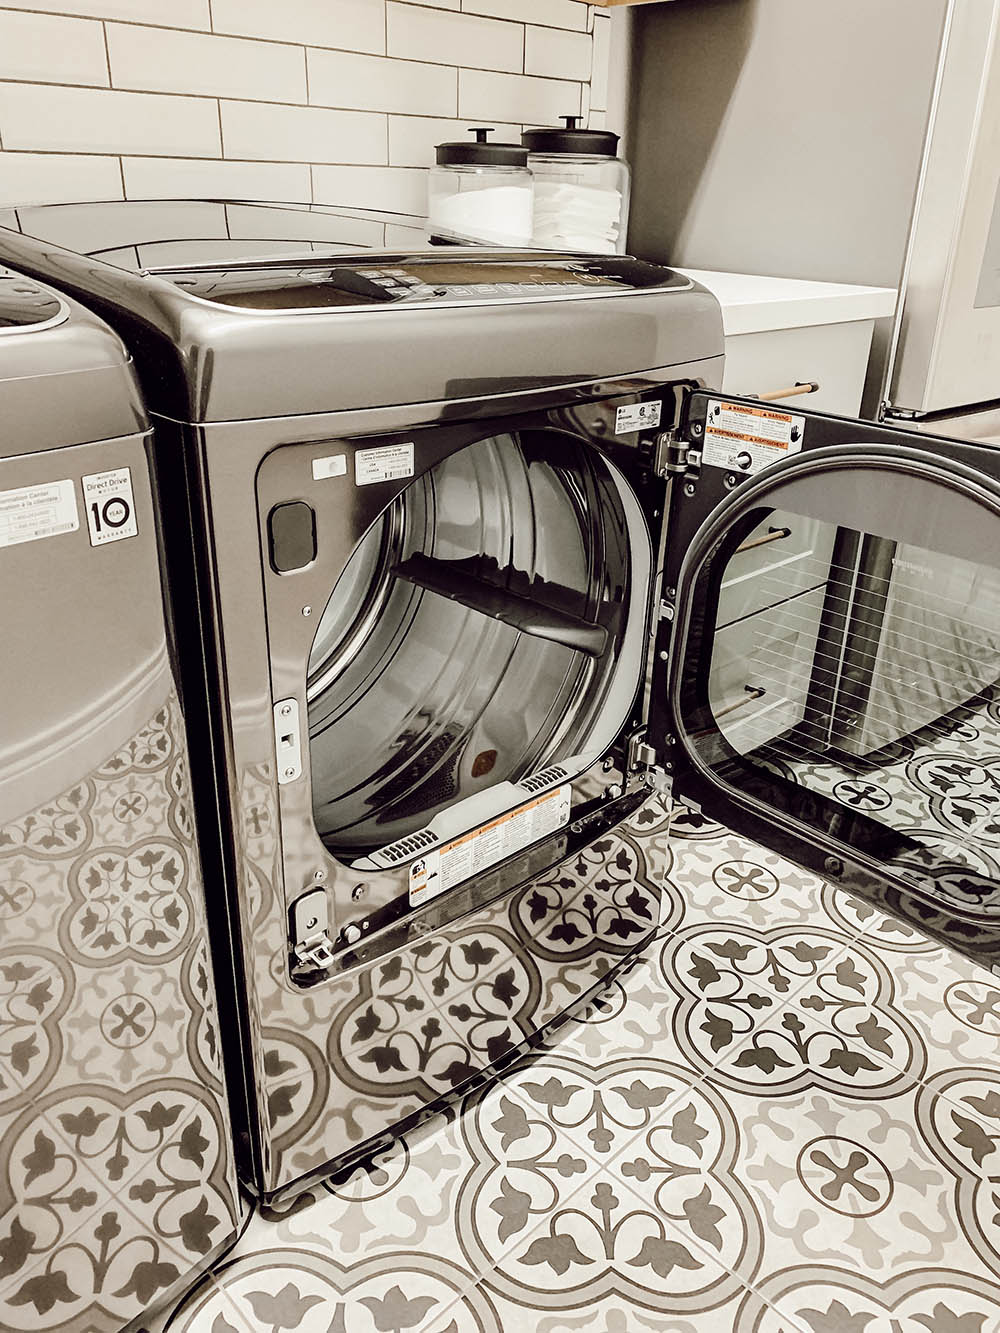 Exterior of the LG Smart Electric Dryer with the door open and mosaic titled flooring.